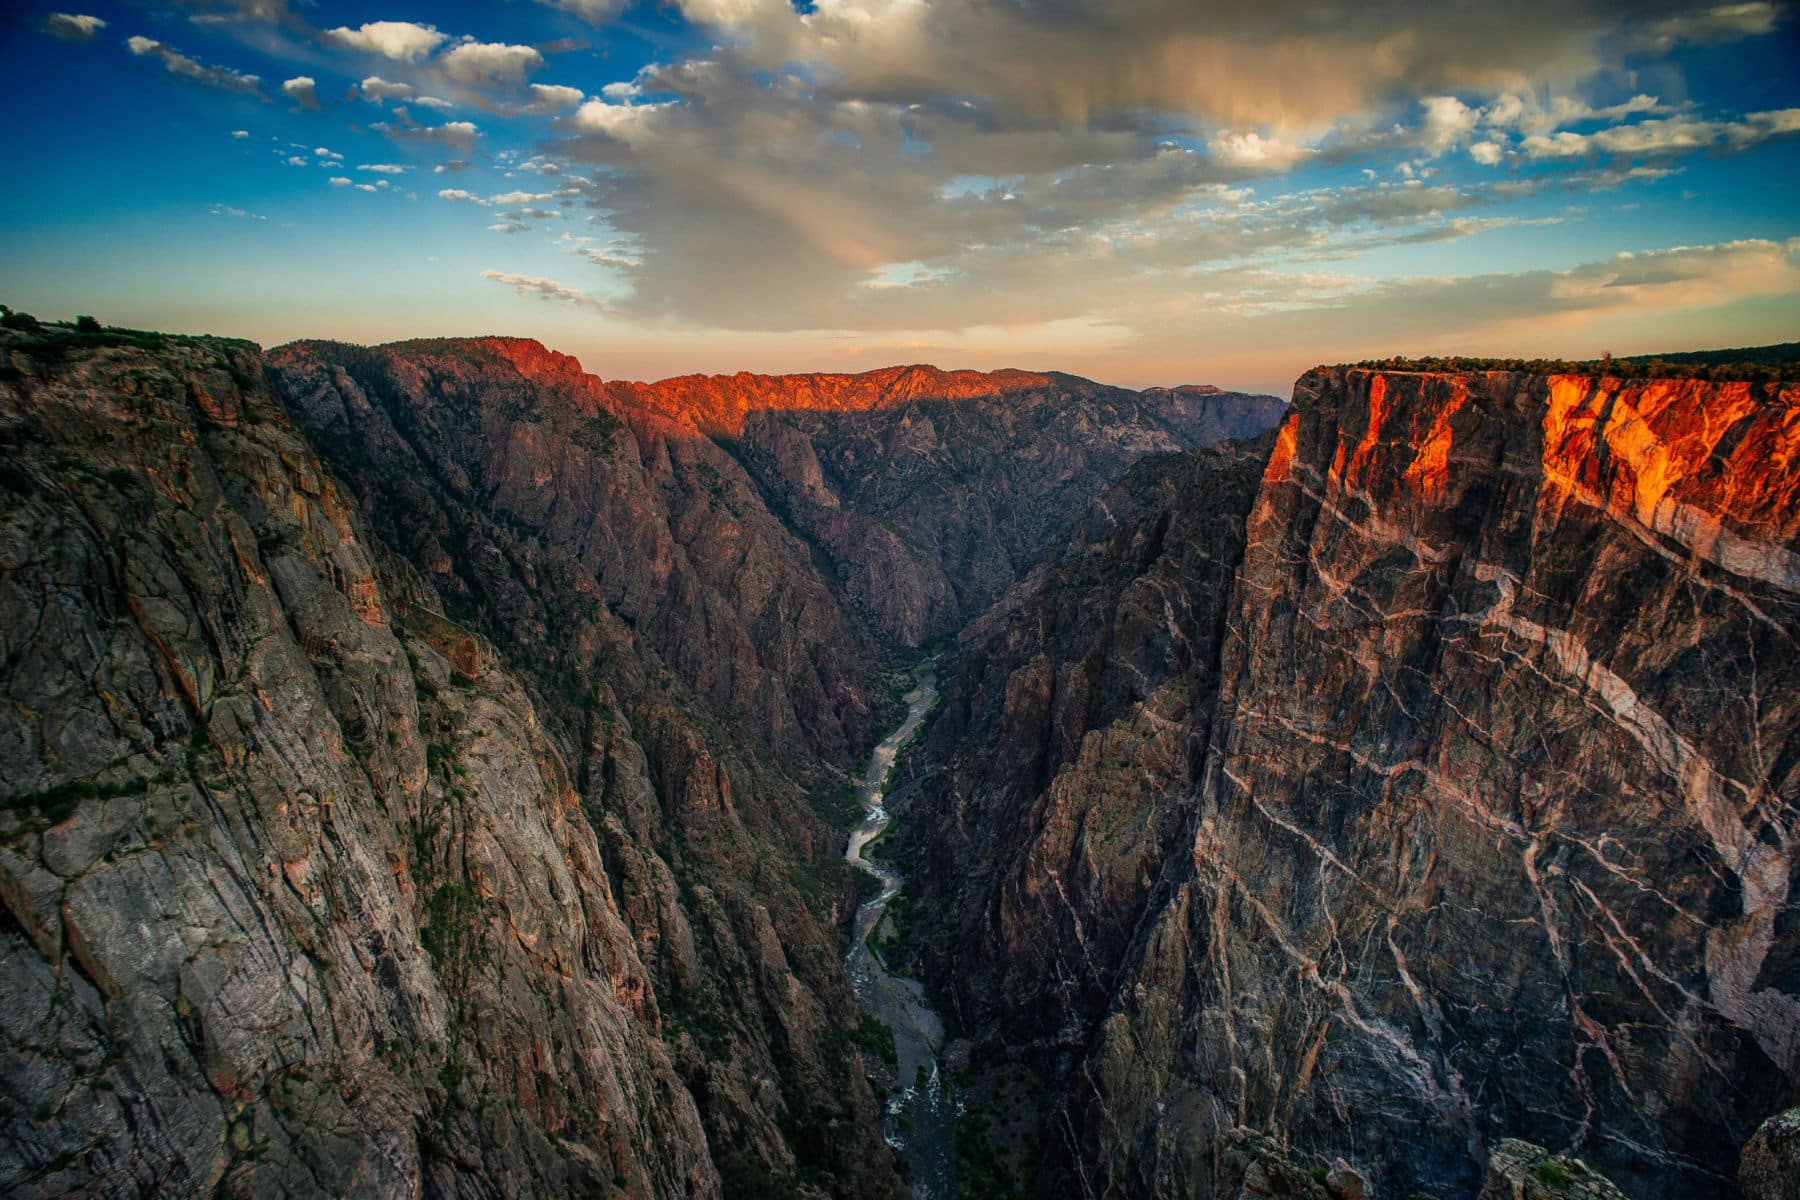 Black Canyon of the Gunnison Facts